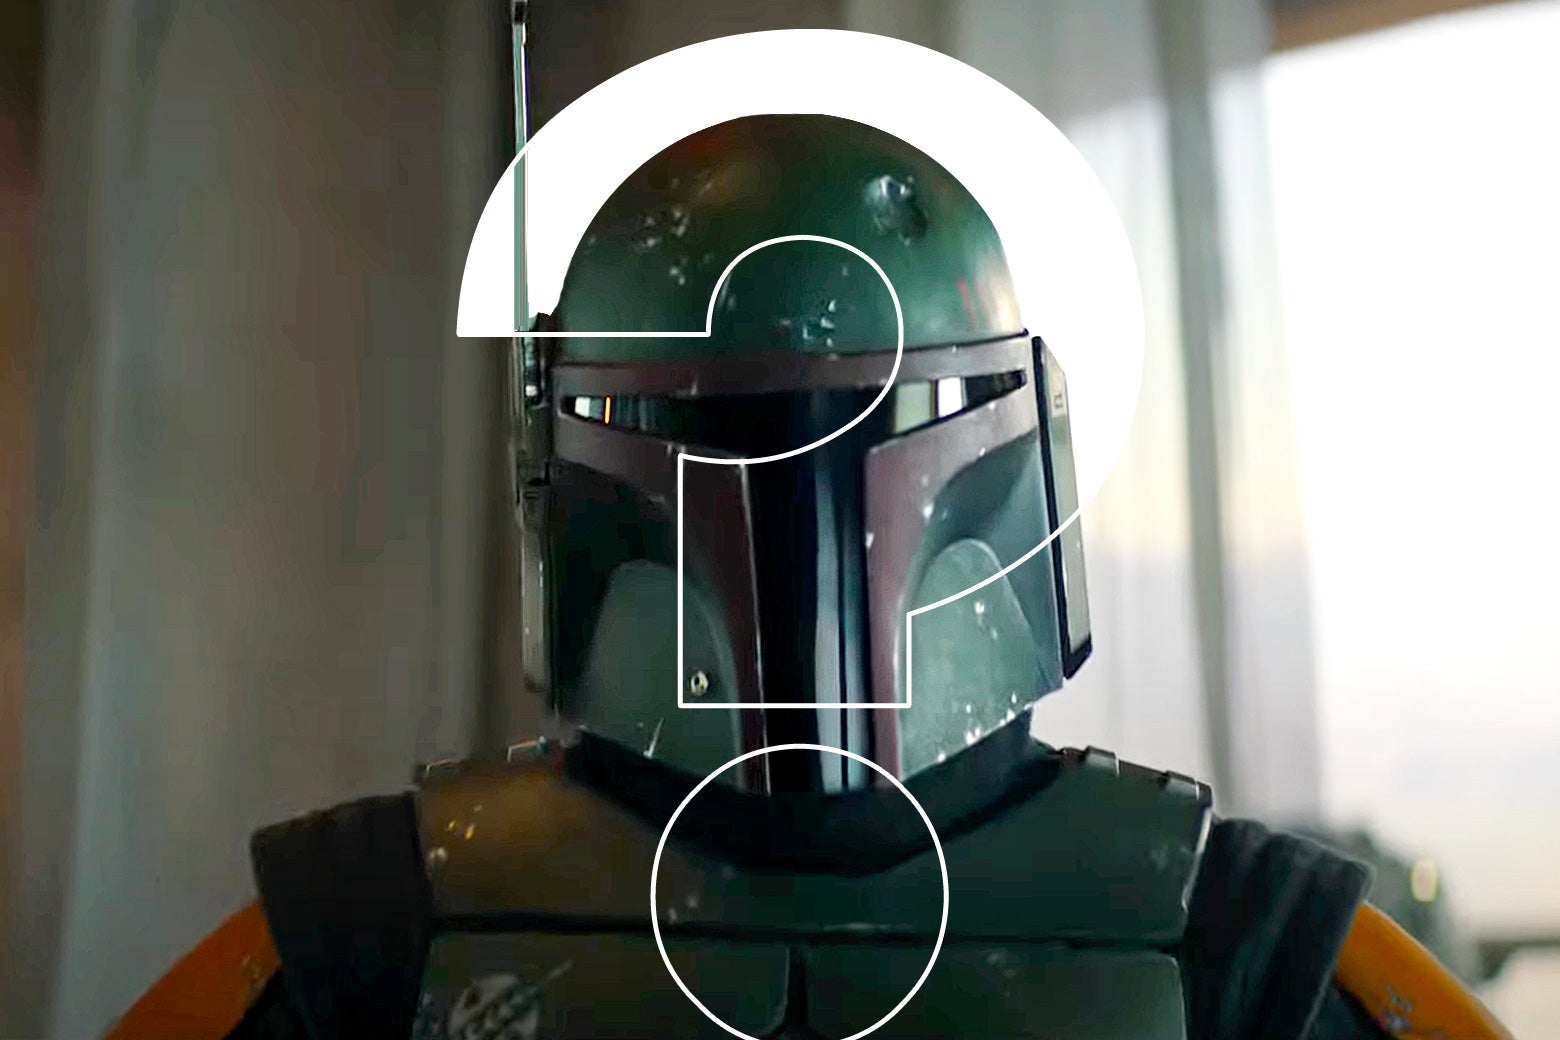 A man in a helmet faces the camera. A question mark illustration lays over his face.